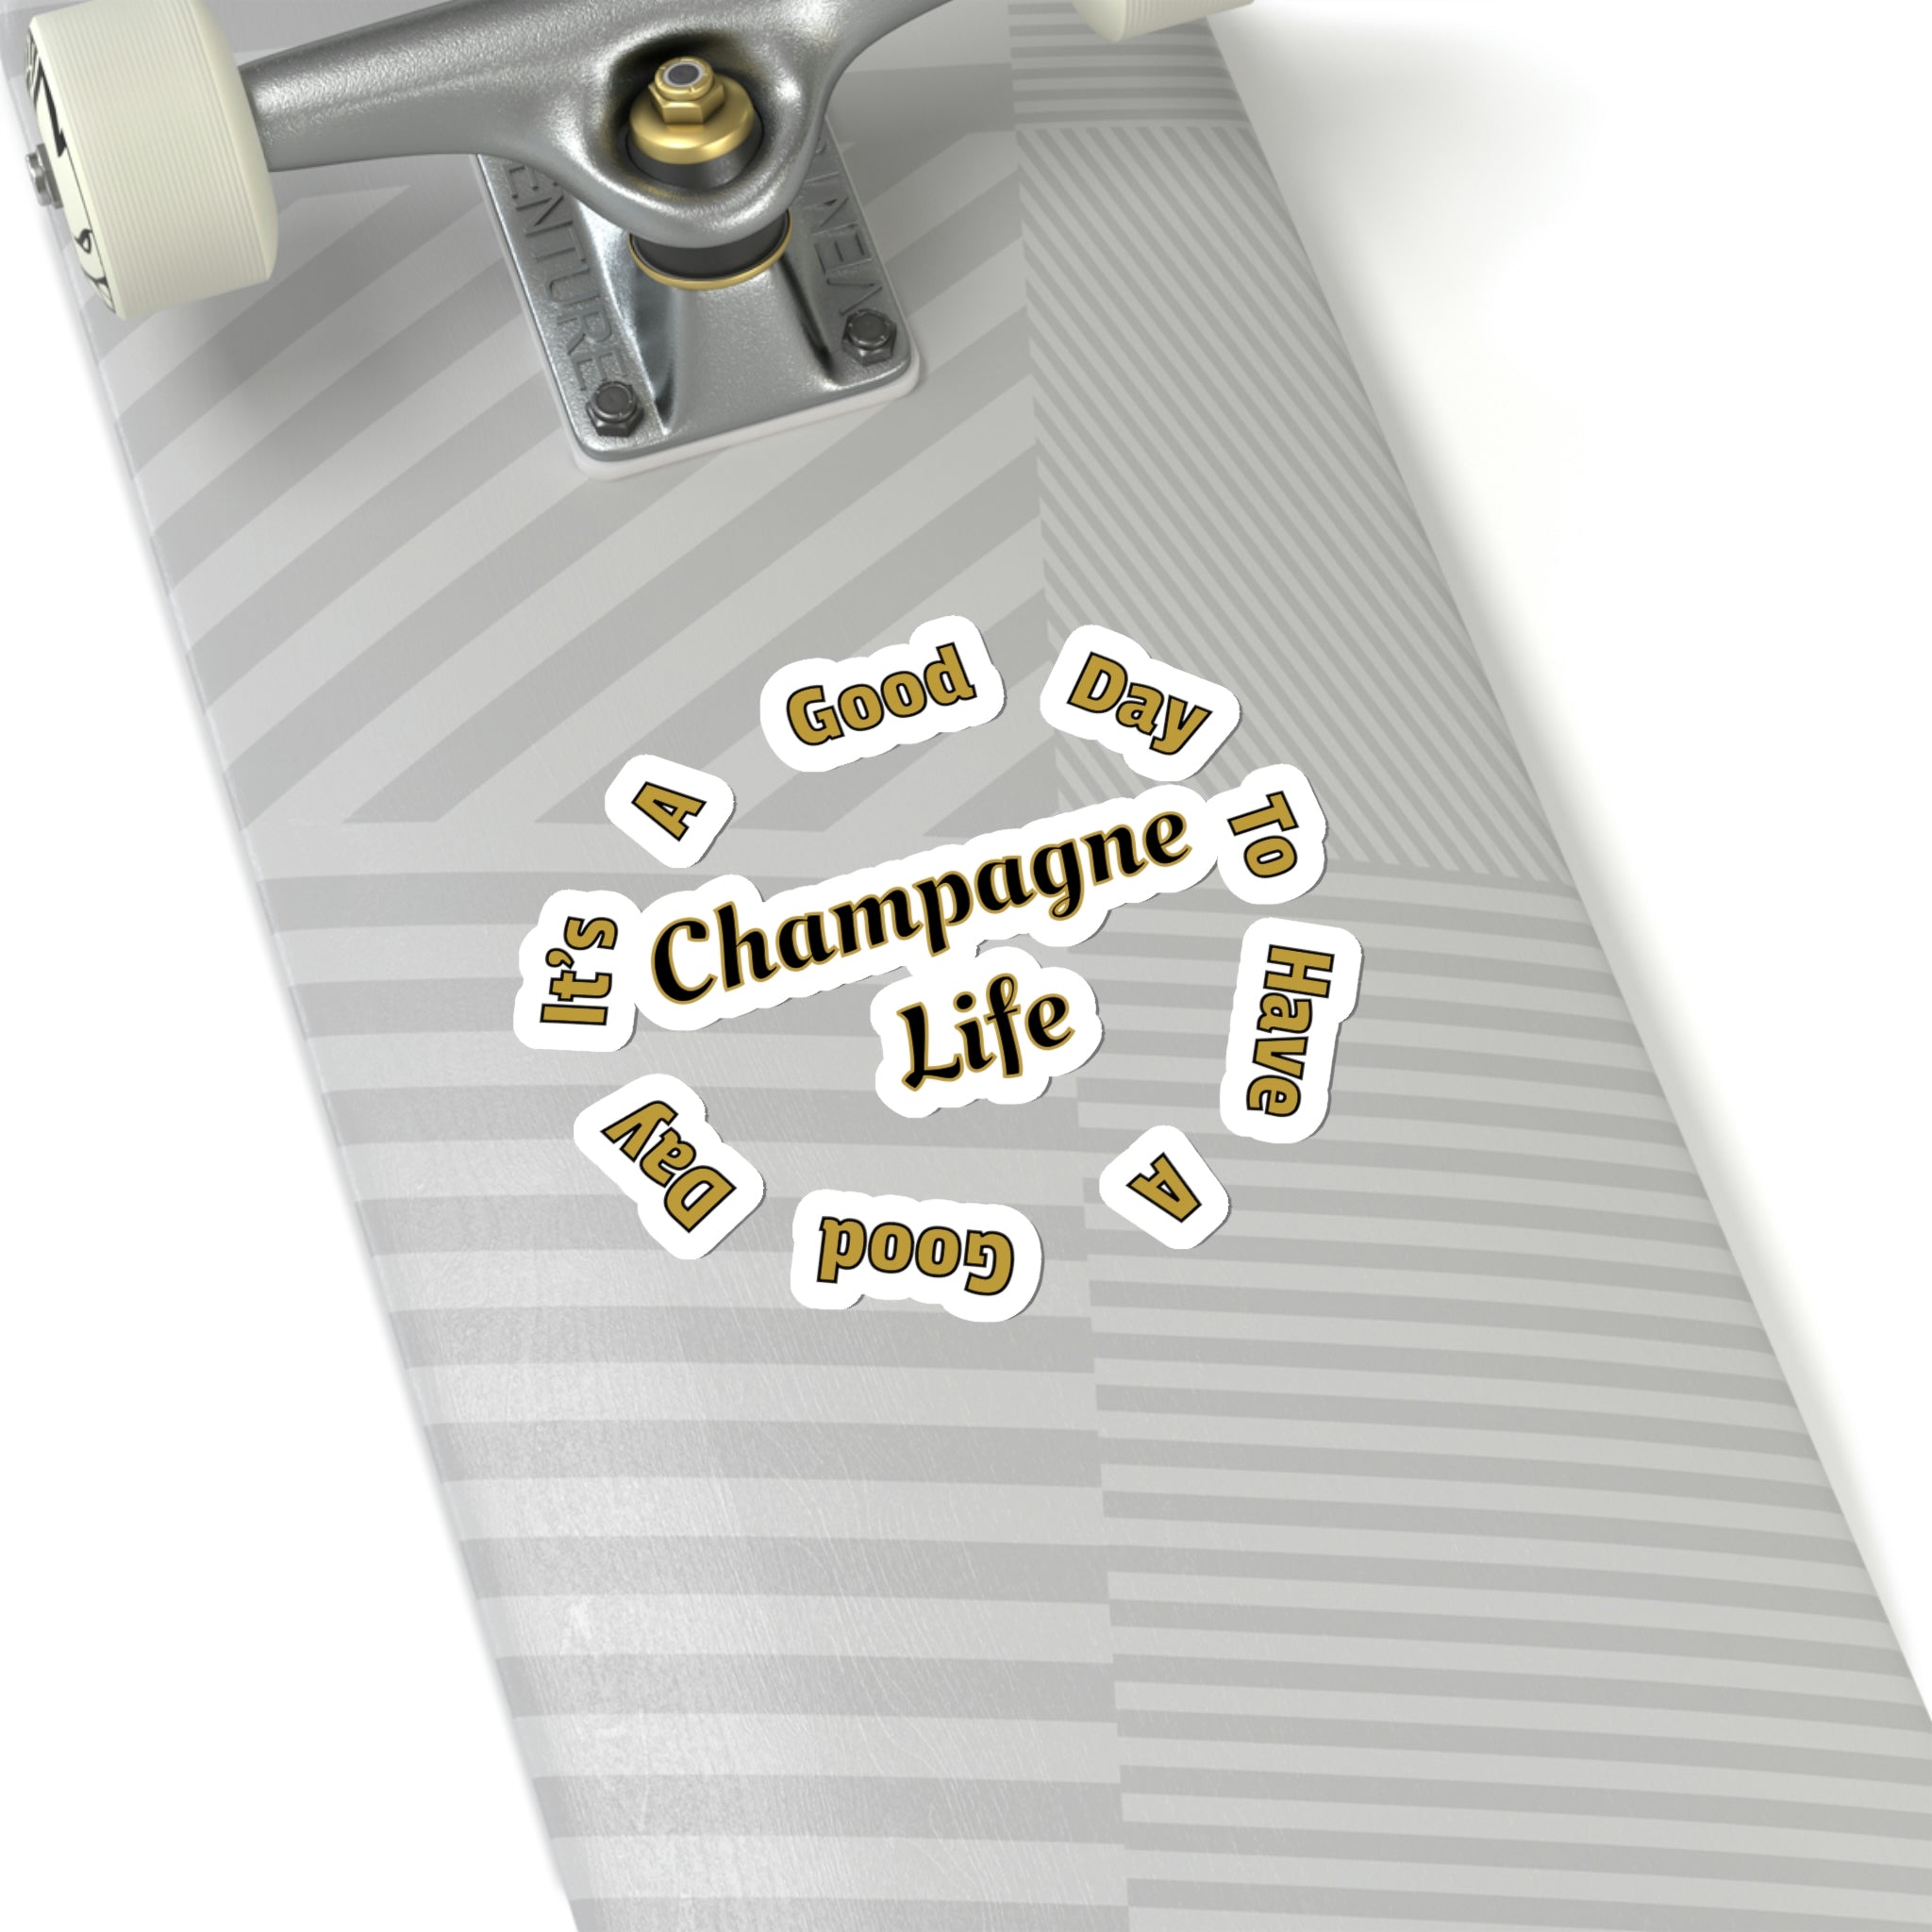 It's a Good Day to Have a Good Day with Champagne Life Kiss-Cut Stickers